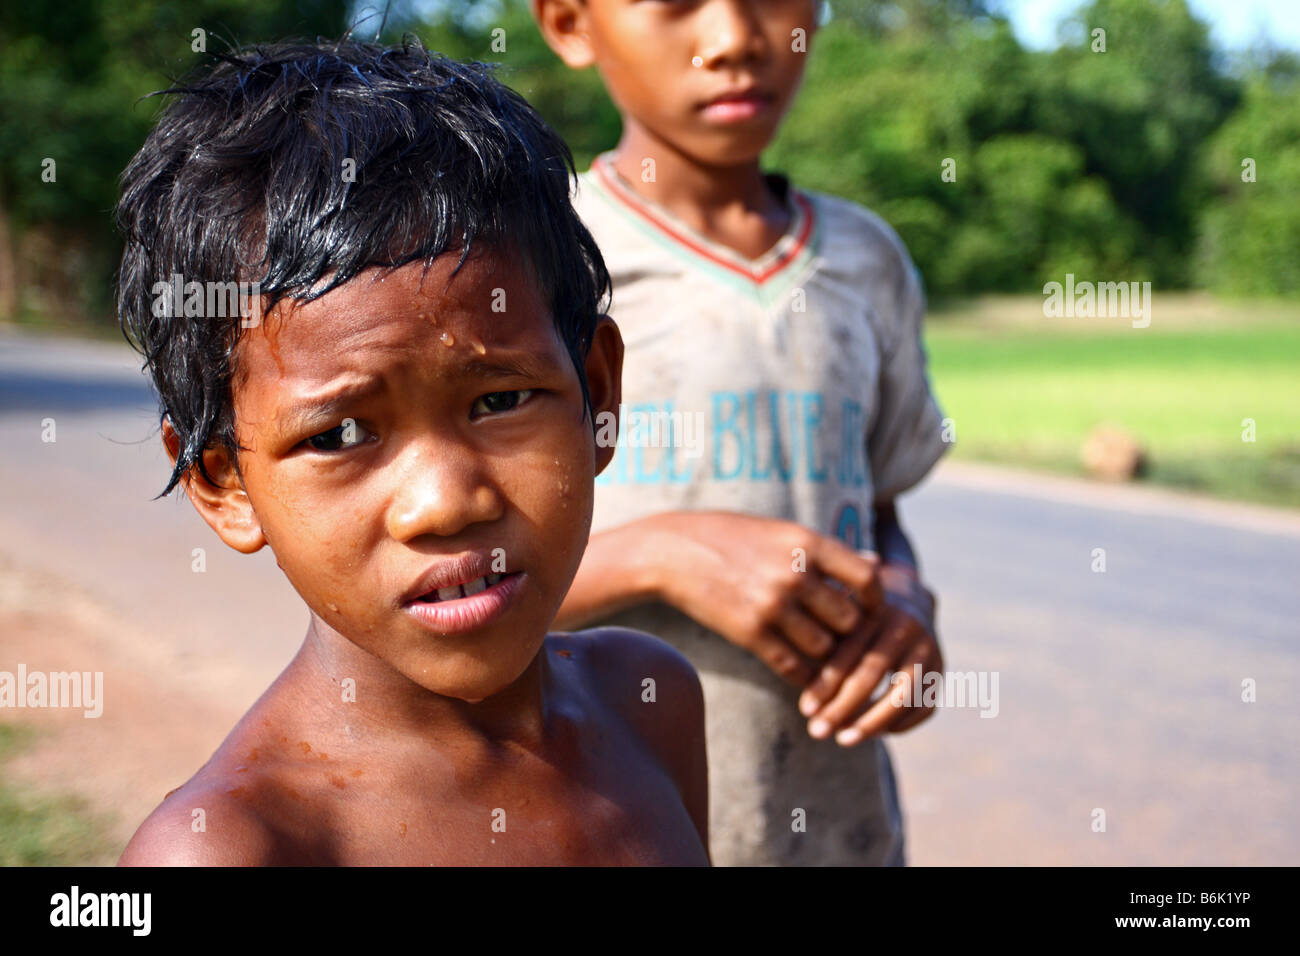 Portrait of a local Cambodian kid with a sad face in the streets arond Angkor Wat, Siem Reap Cambodia Stock Photo